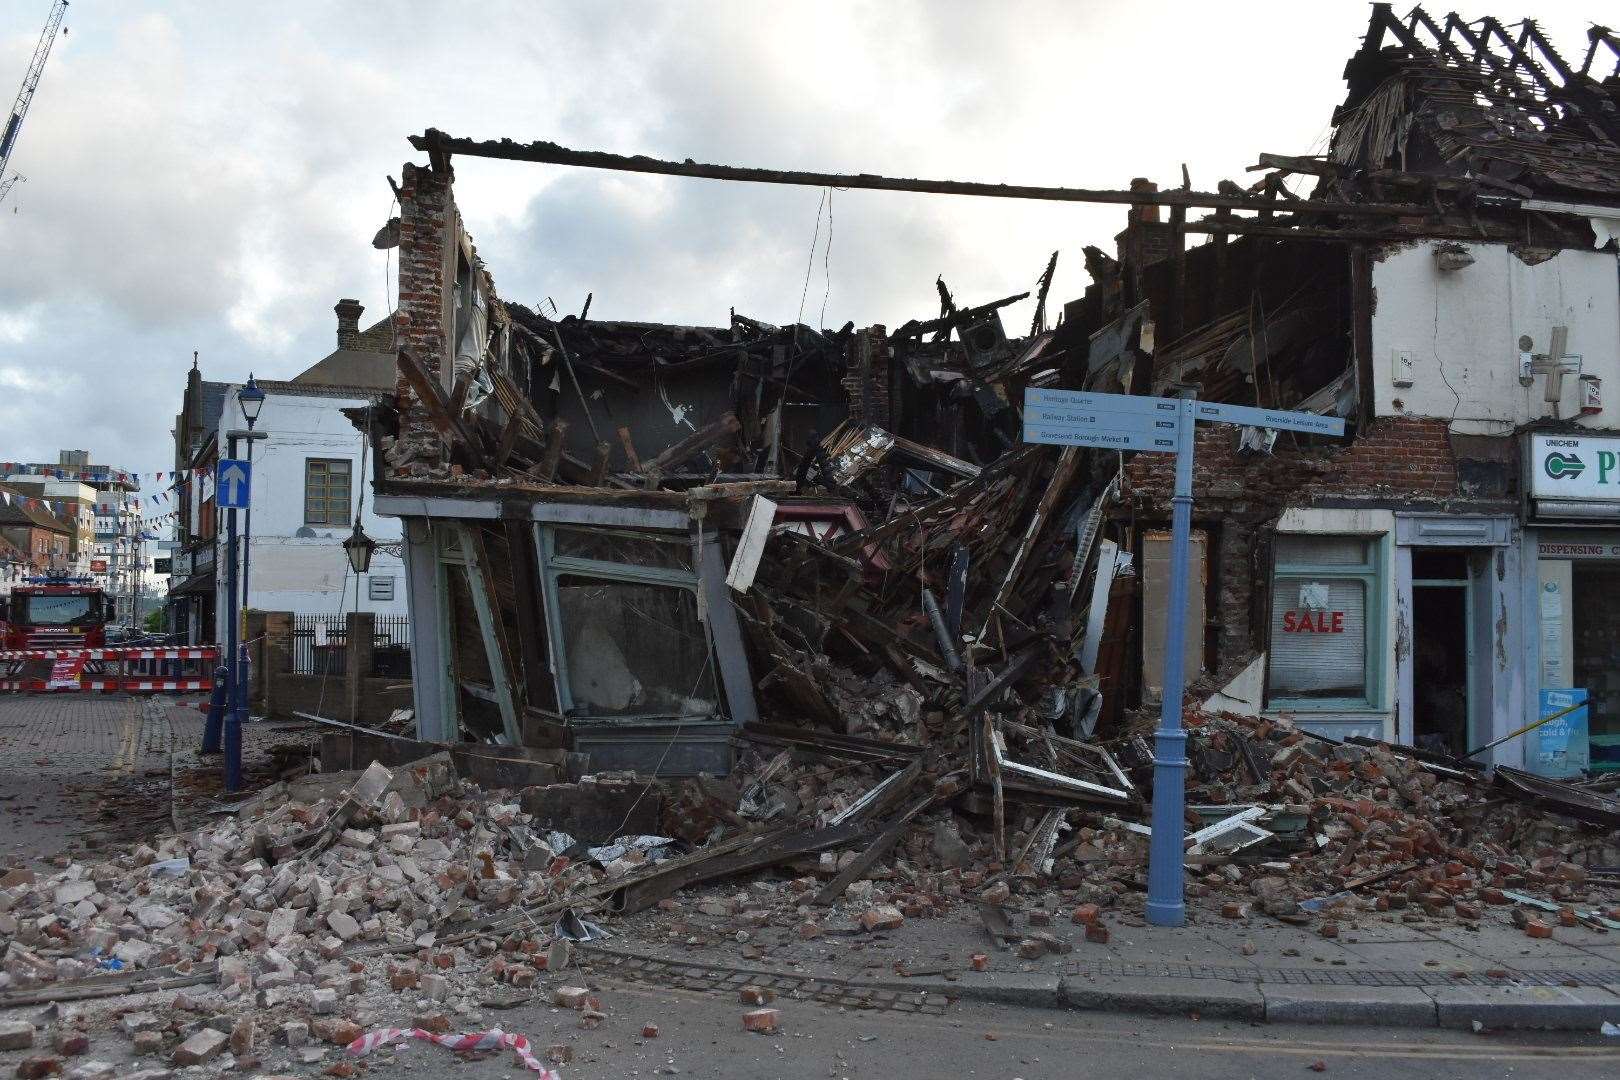 The remains of the building on Friday, May 27